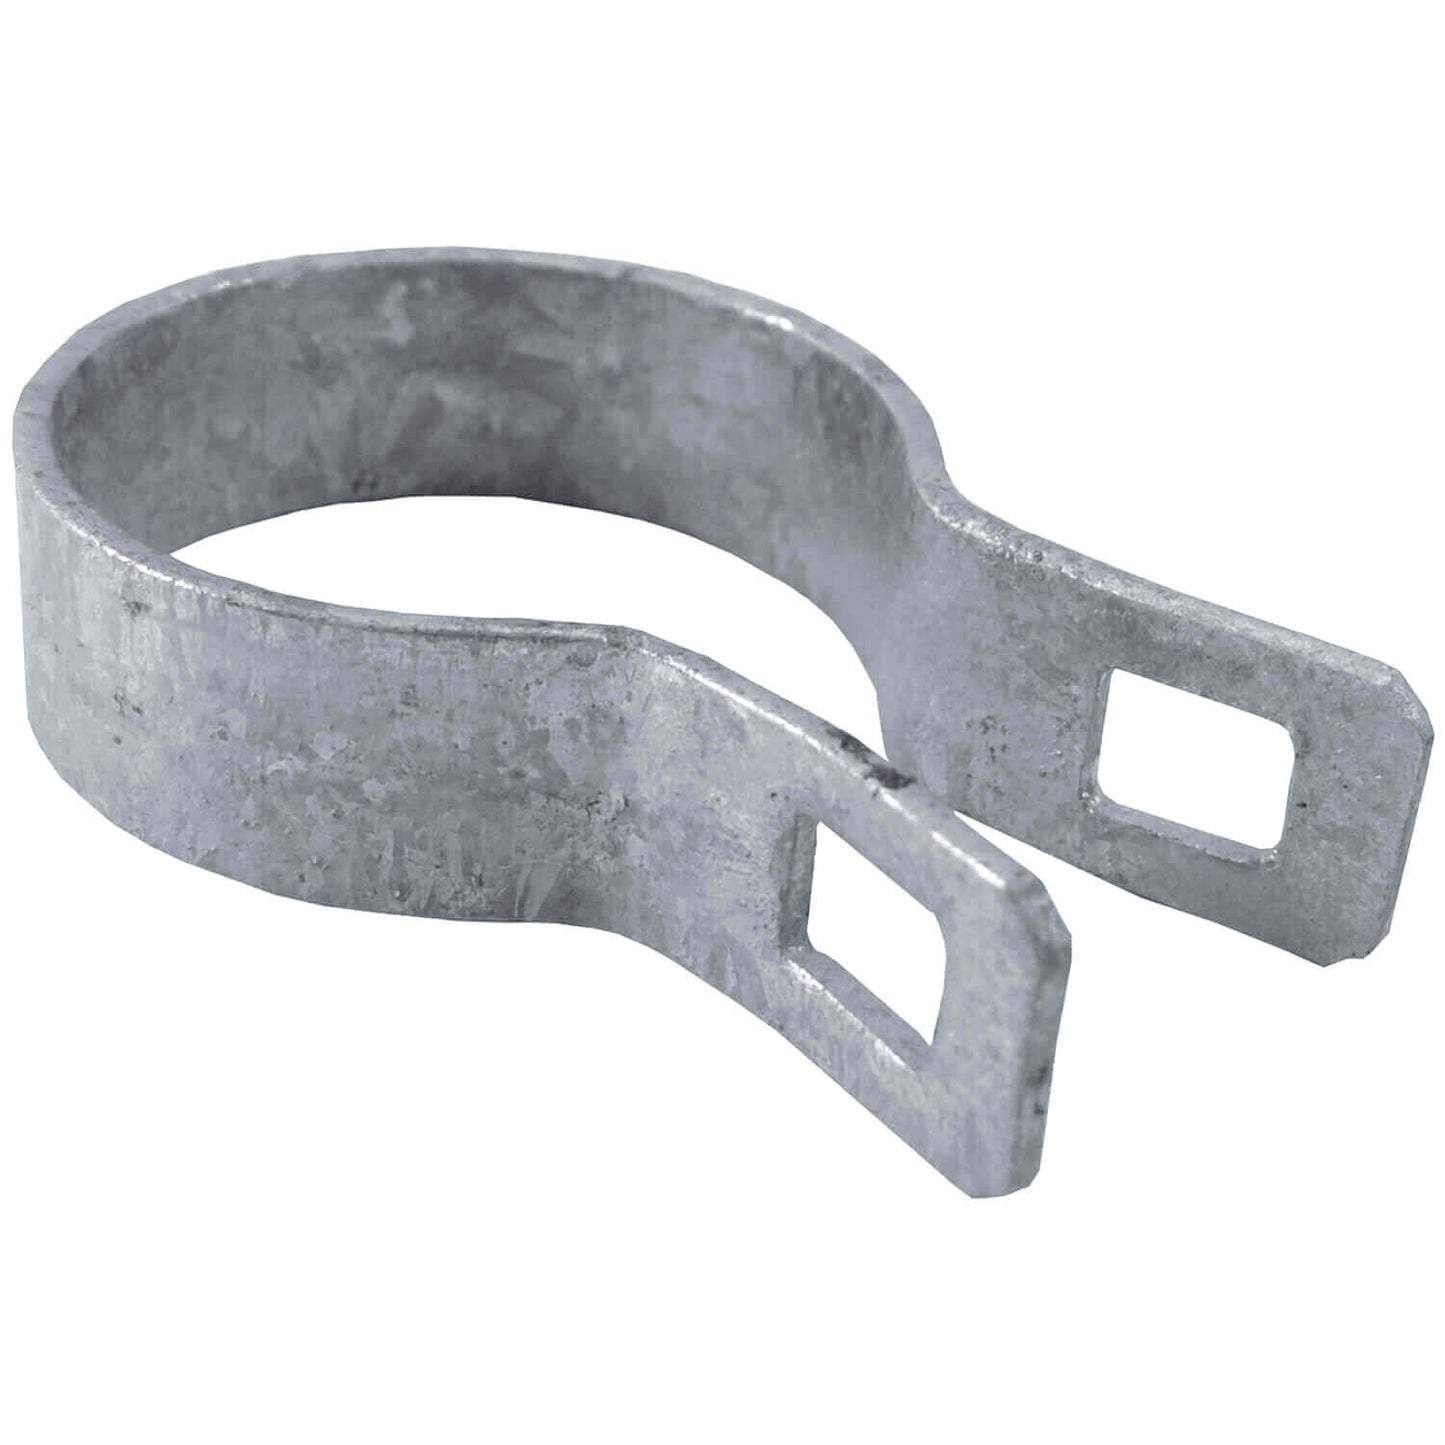 Brace Band for Chain Link Fence -  Galvanized Chain Link Brace Band. Attach Rail Ends to terminal post, corner fence post, end fence post, gate fence post or gate frame